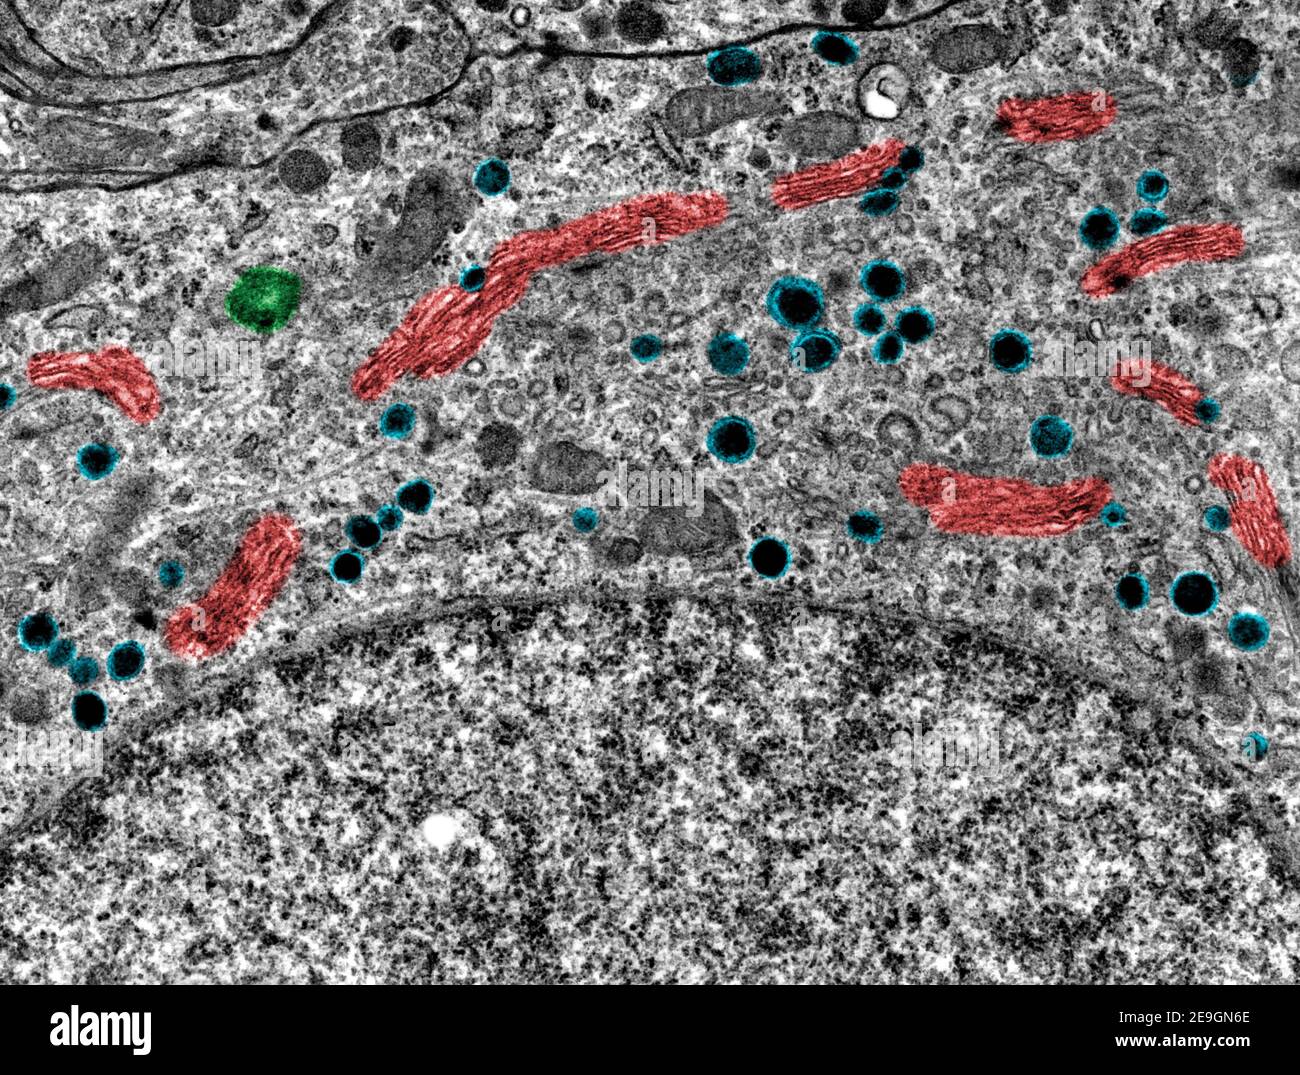 False colour transmission electron microscope (TEM) micrograph showing cisternae (red) of the Golgi complex, a centriole (green) and secretory granule Stock Photo